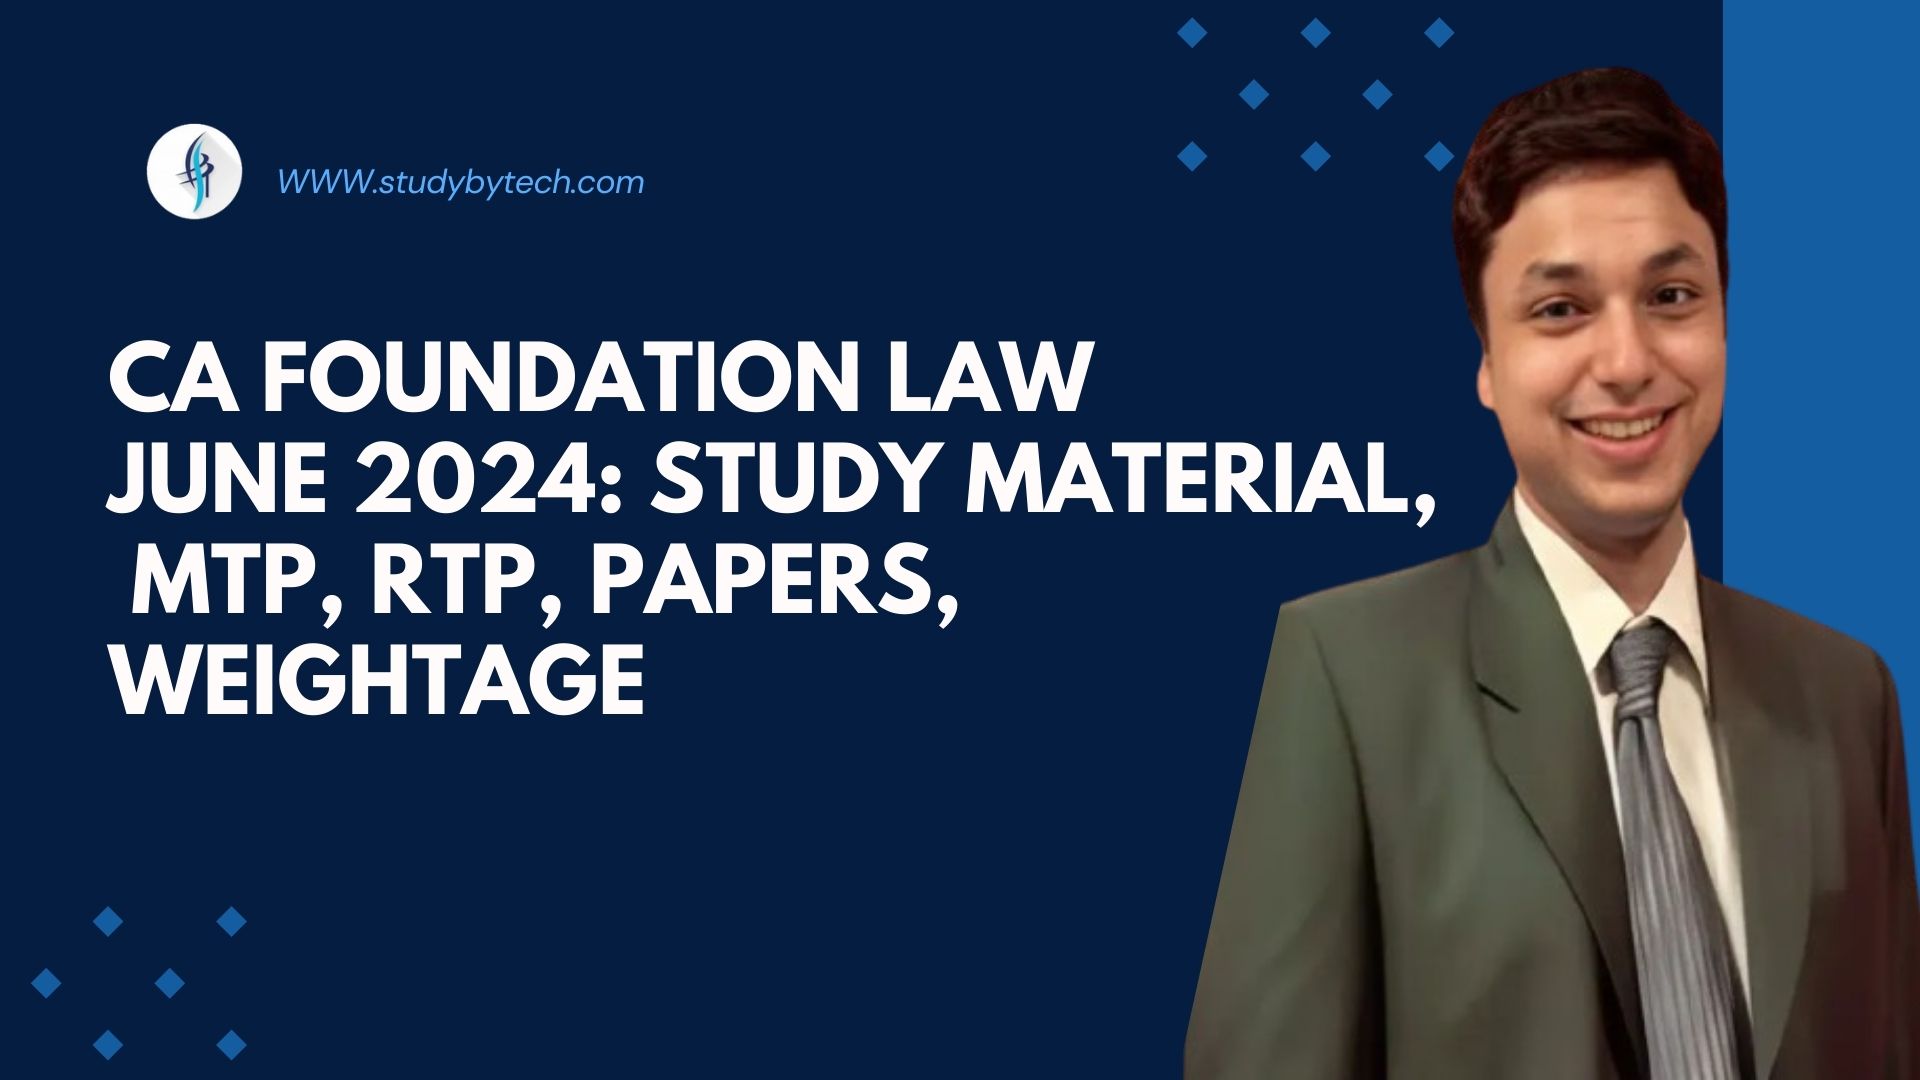 CA Foundation Law Sept 2024: Study Material, MTP, RTP, Papers, Weightage